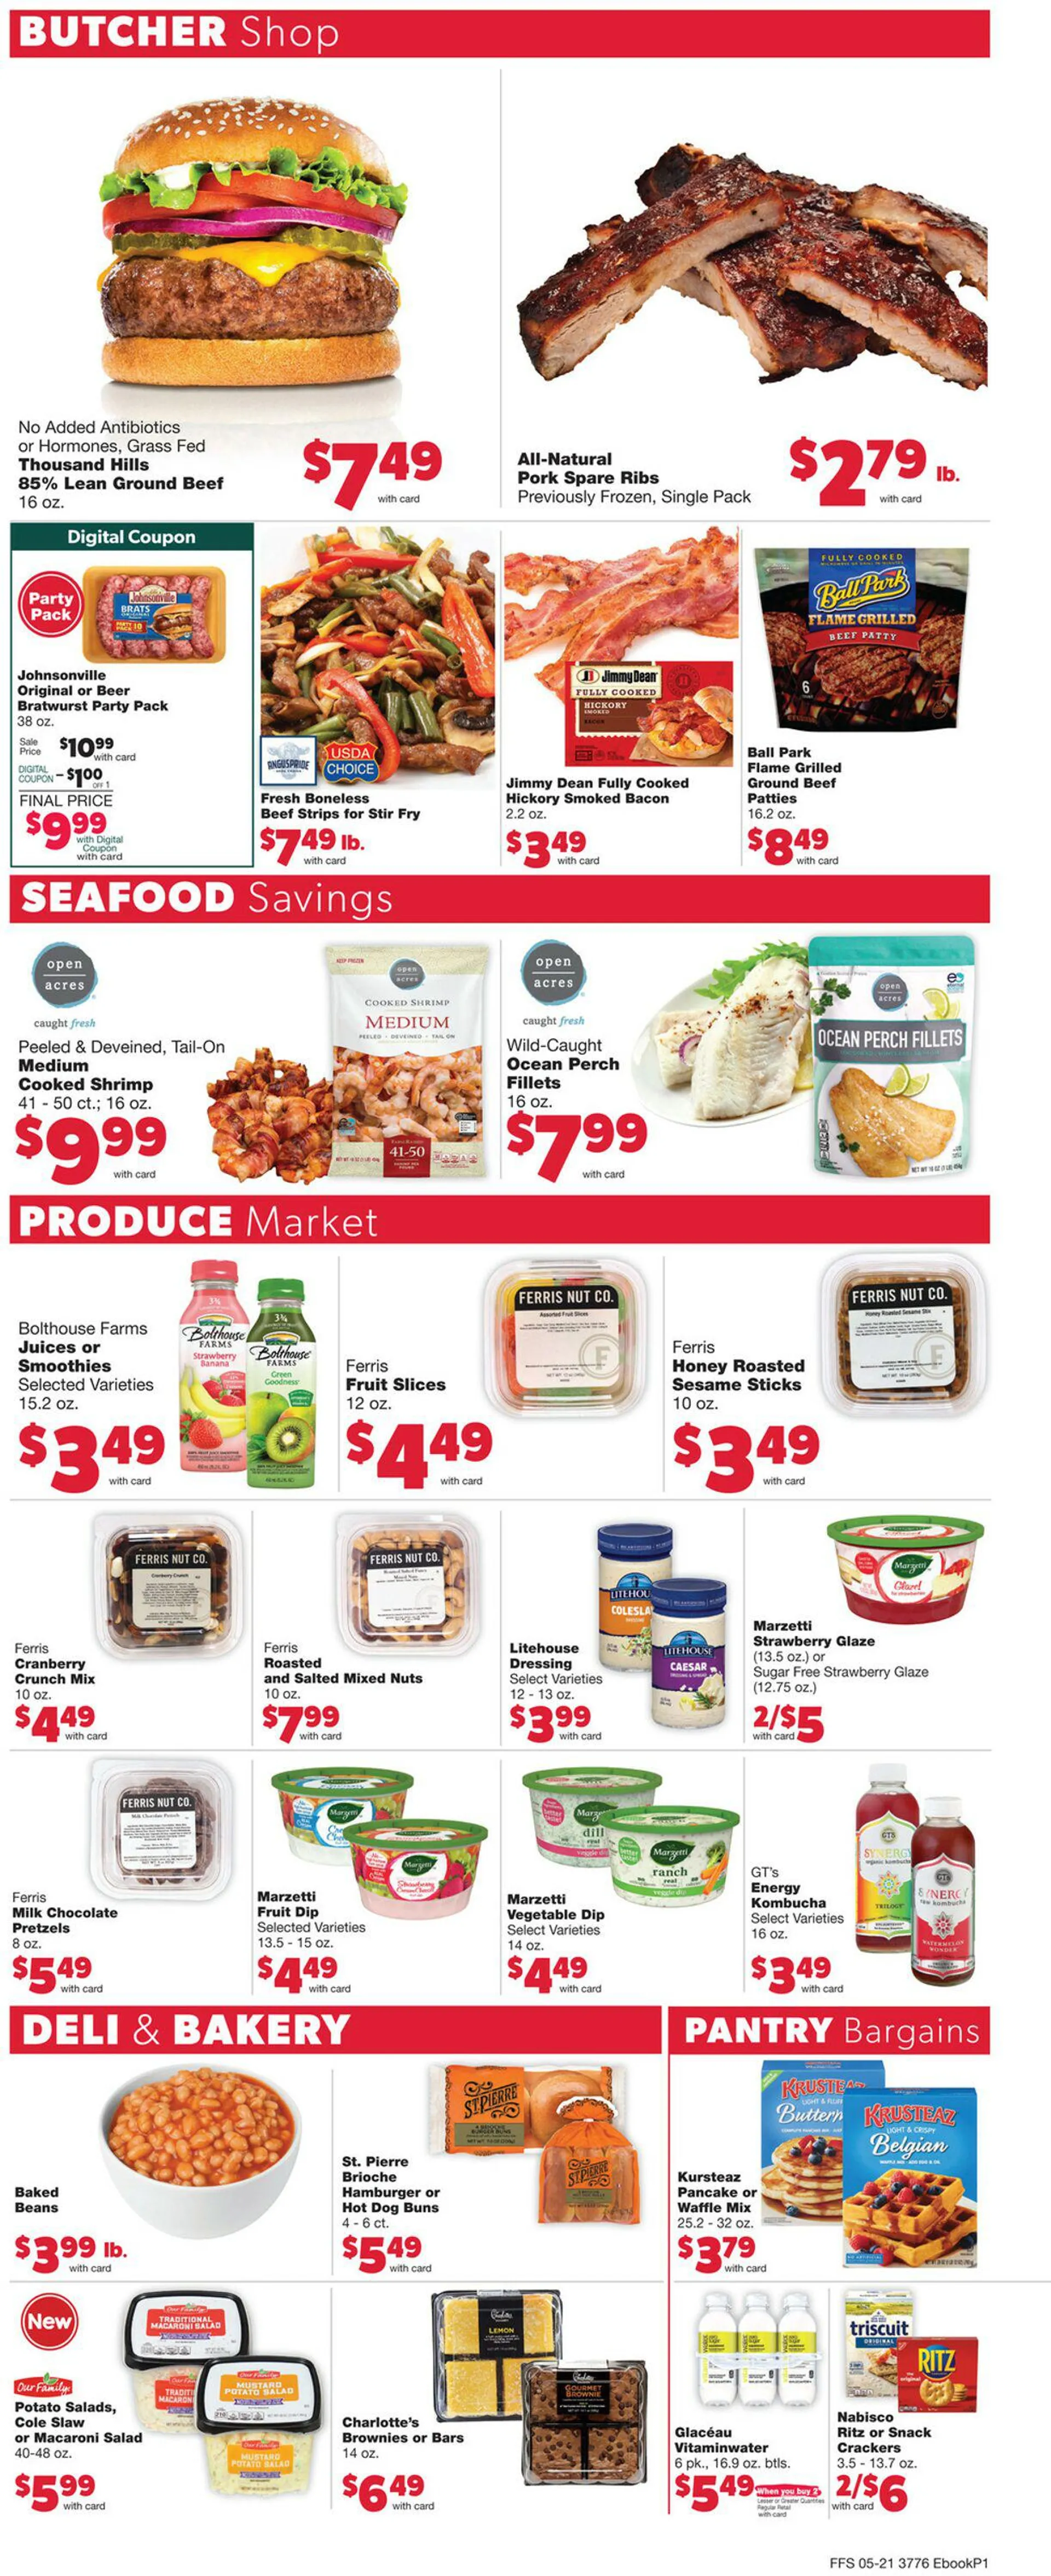 Family Fare Current weekly ad - 8